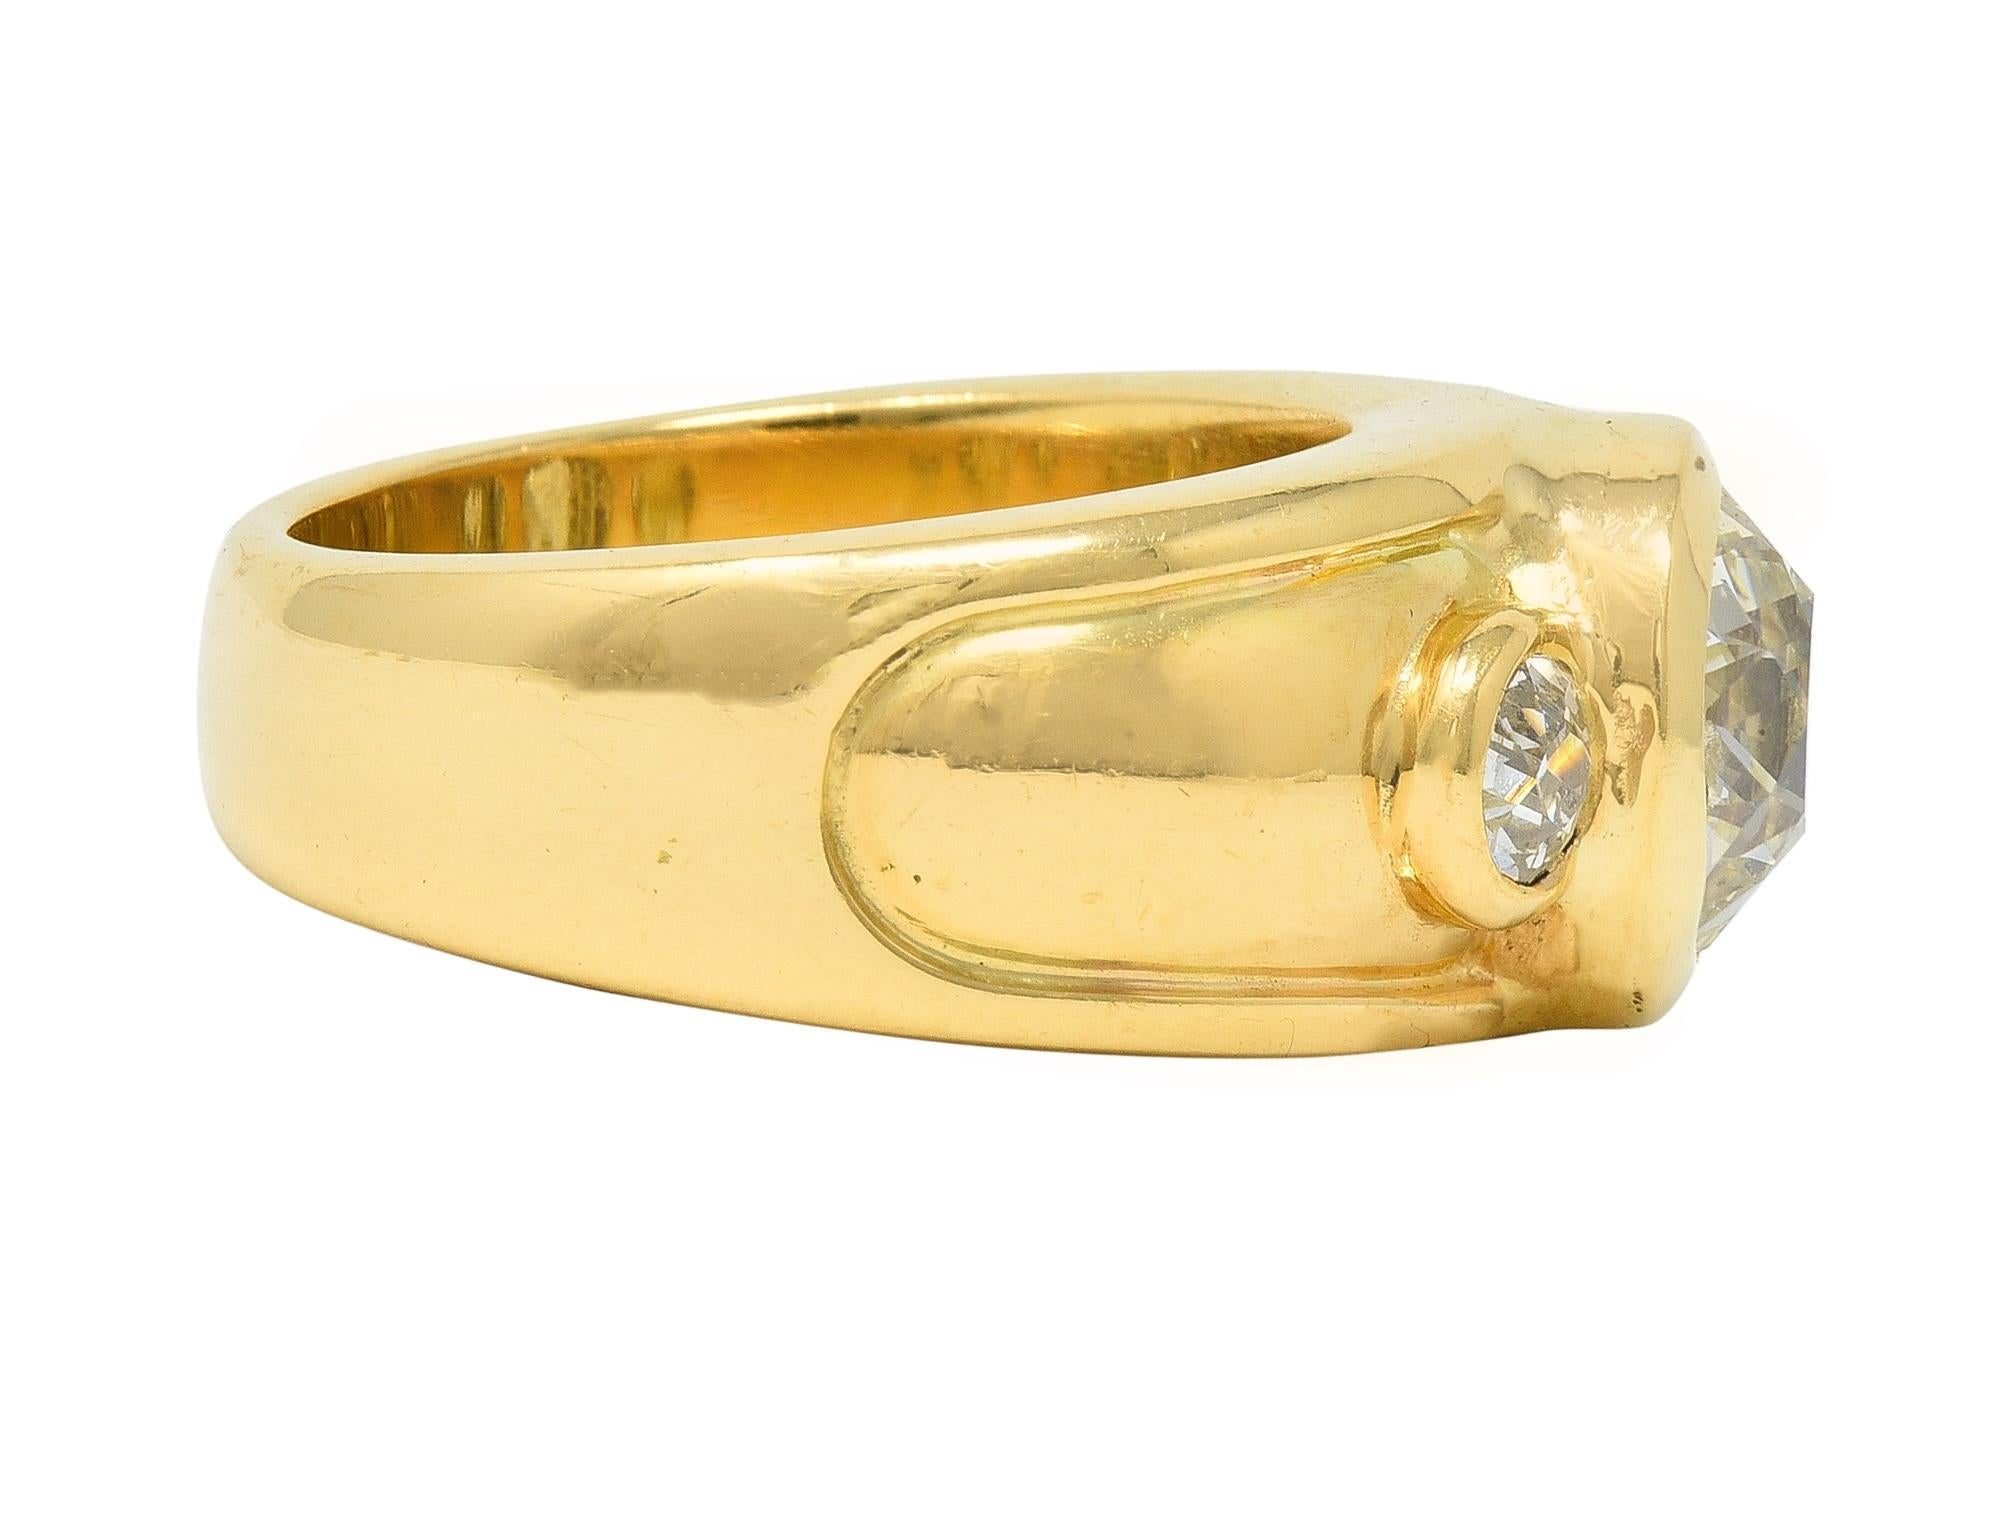 Mellerio 2.95 CTW Old Mine Cut Diamond 18 Karat Yellow Gold Three Stone Ring In Excellent Condition For Sale In Philadelphia, PA